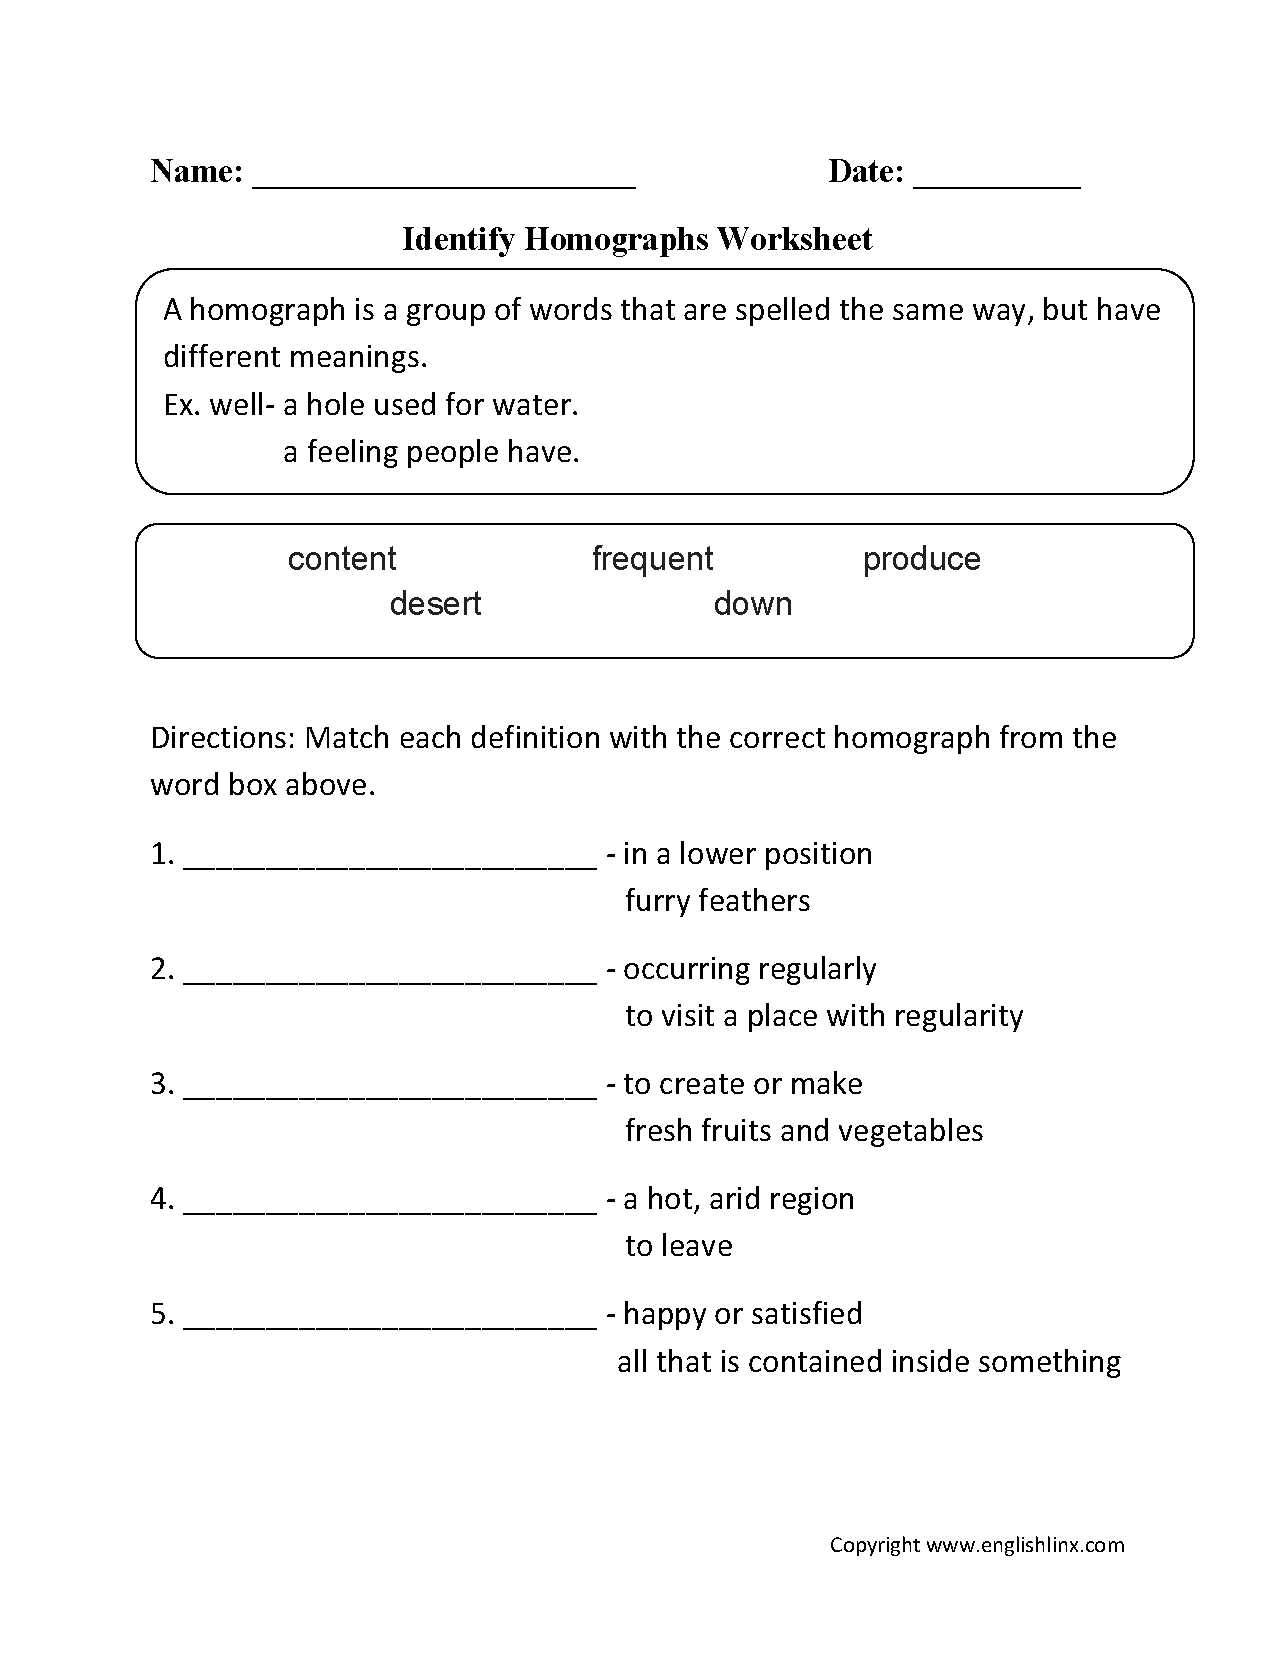 Multiple Meaning Words Worksheets 5th Grade Along with Dictionary Worksheets 2nd Grade Image Collections Worksheet for